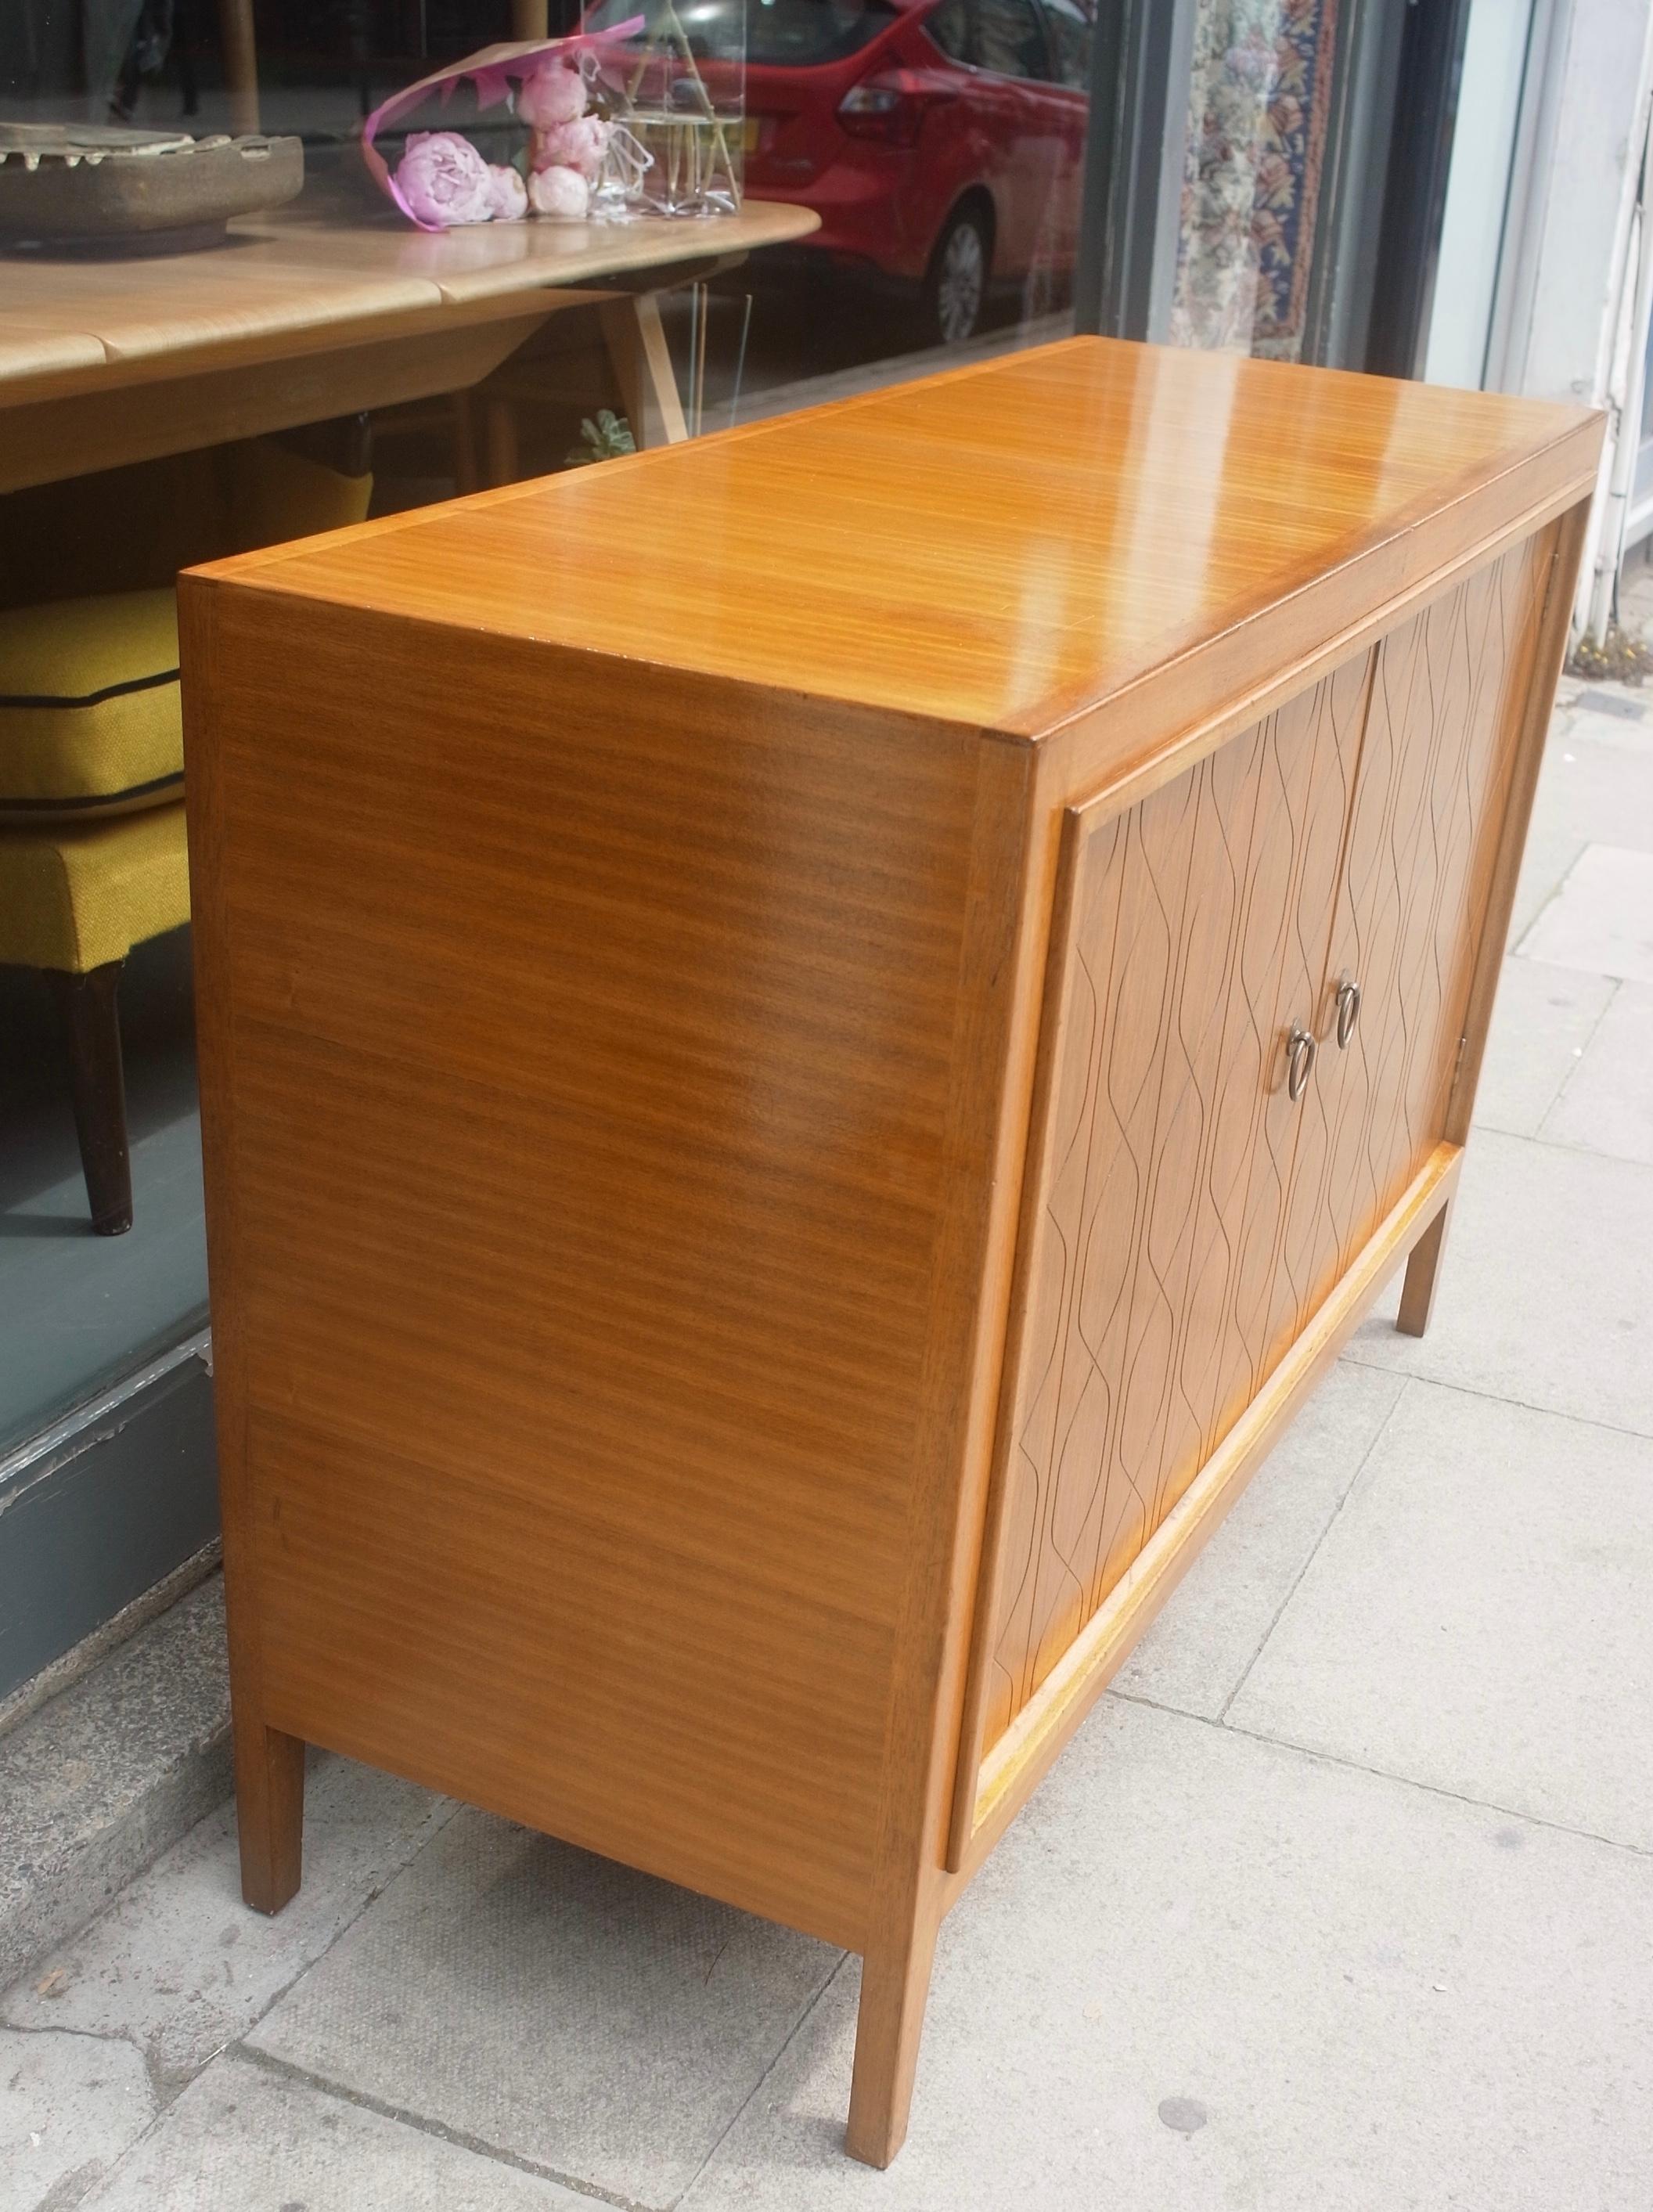 1950s Mahogany and Hardwood sideboard designed by David Booth and Judith Ledeboer for Gordon Russell of Broadway. 
Model 407 originally exhibited at the Festival of Britain in 1951, later went into production in 1953, and has become an iconic piece